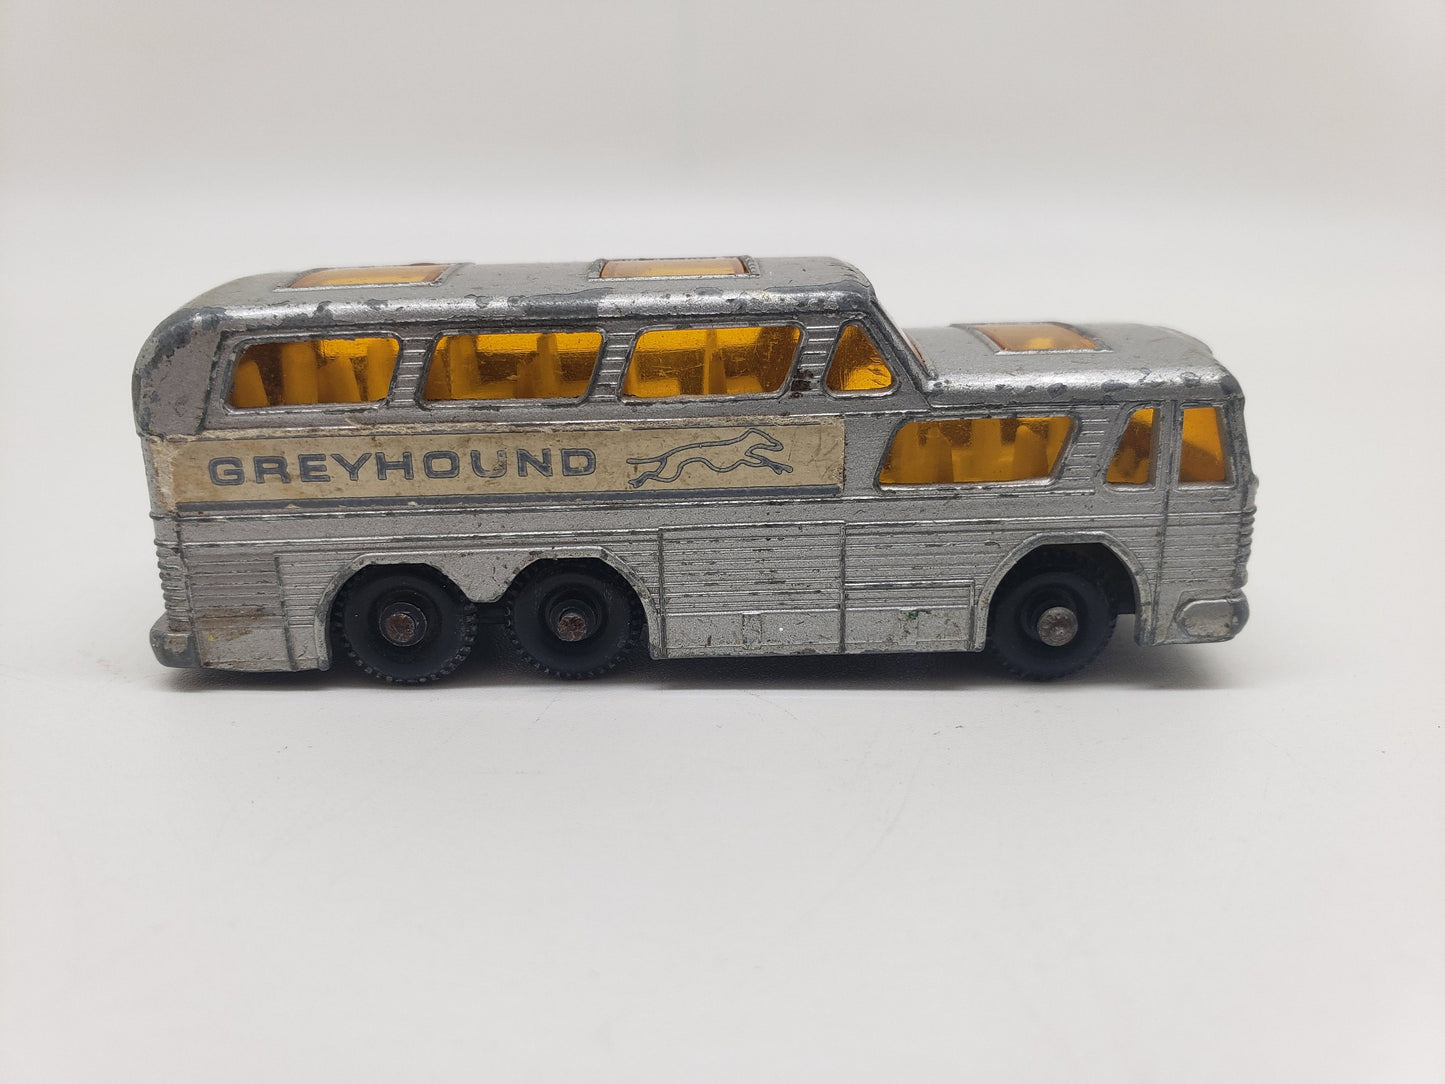 Matchbox 1966 Greyhound Coach Bus Silver Collectable Scale Model Miniature Toy Car Perfect Birthday Gift